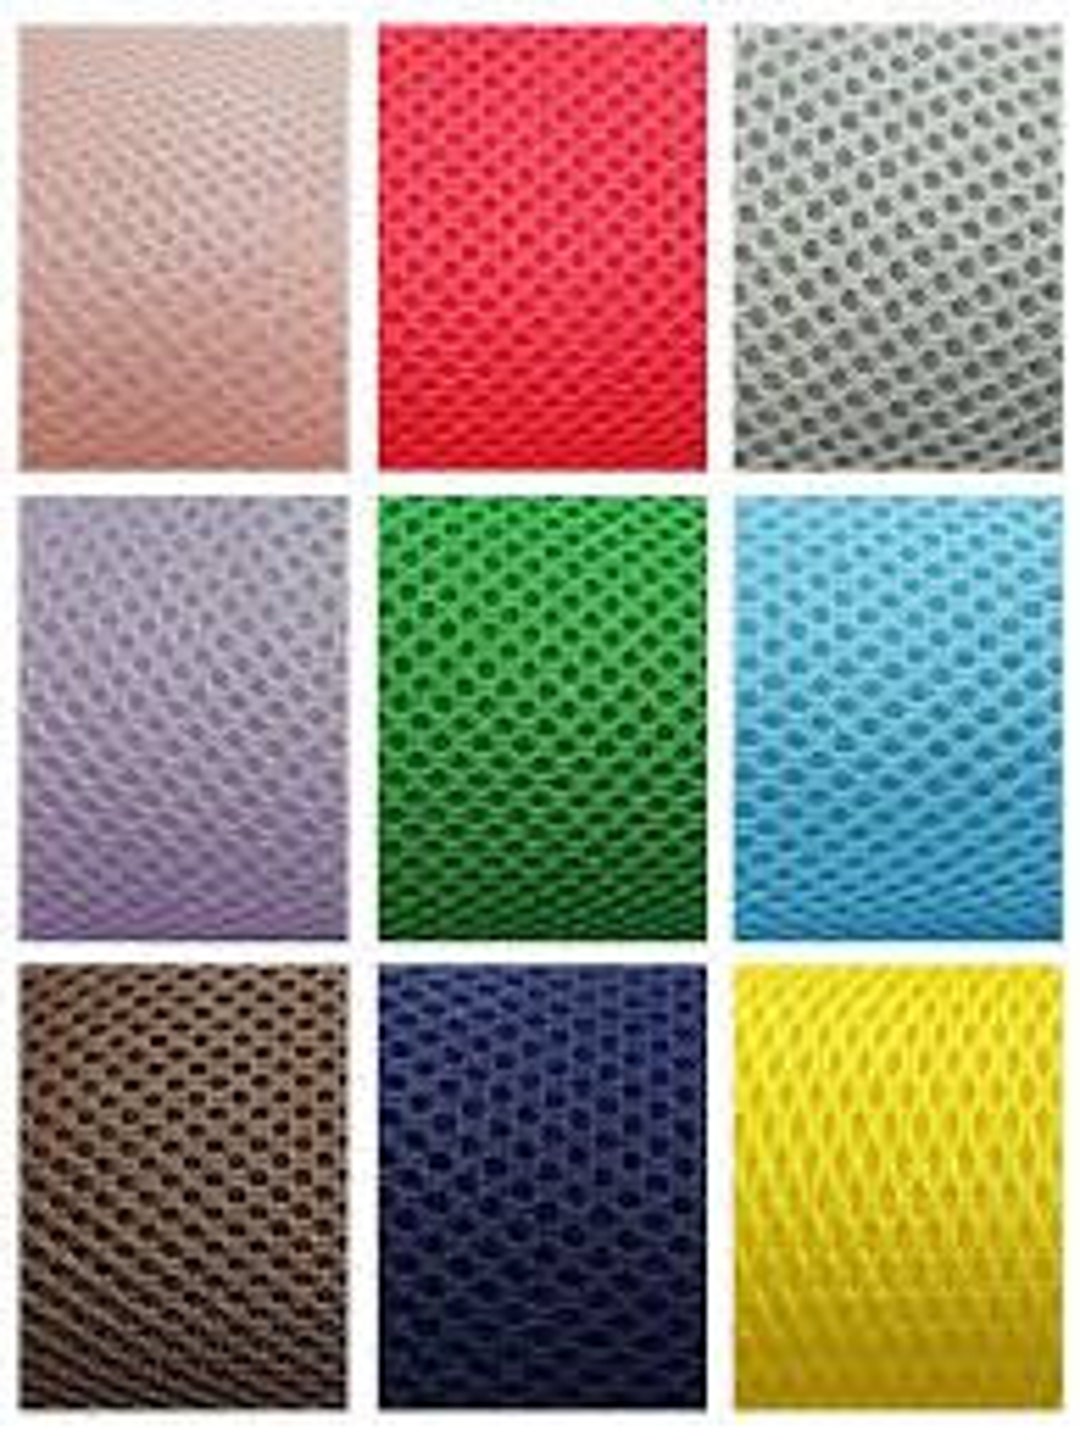 Eco-friendly Soft 8mm Black 3d Spacer Air Mesh Fabric With